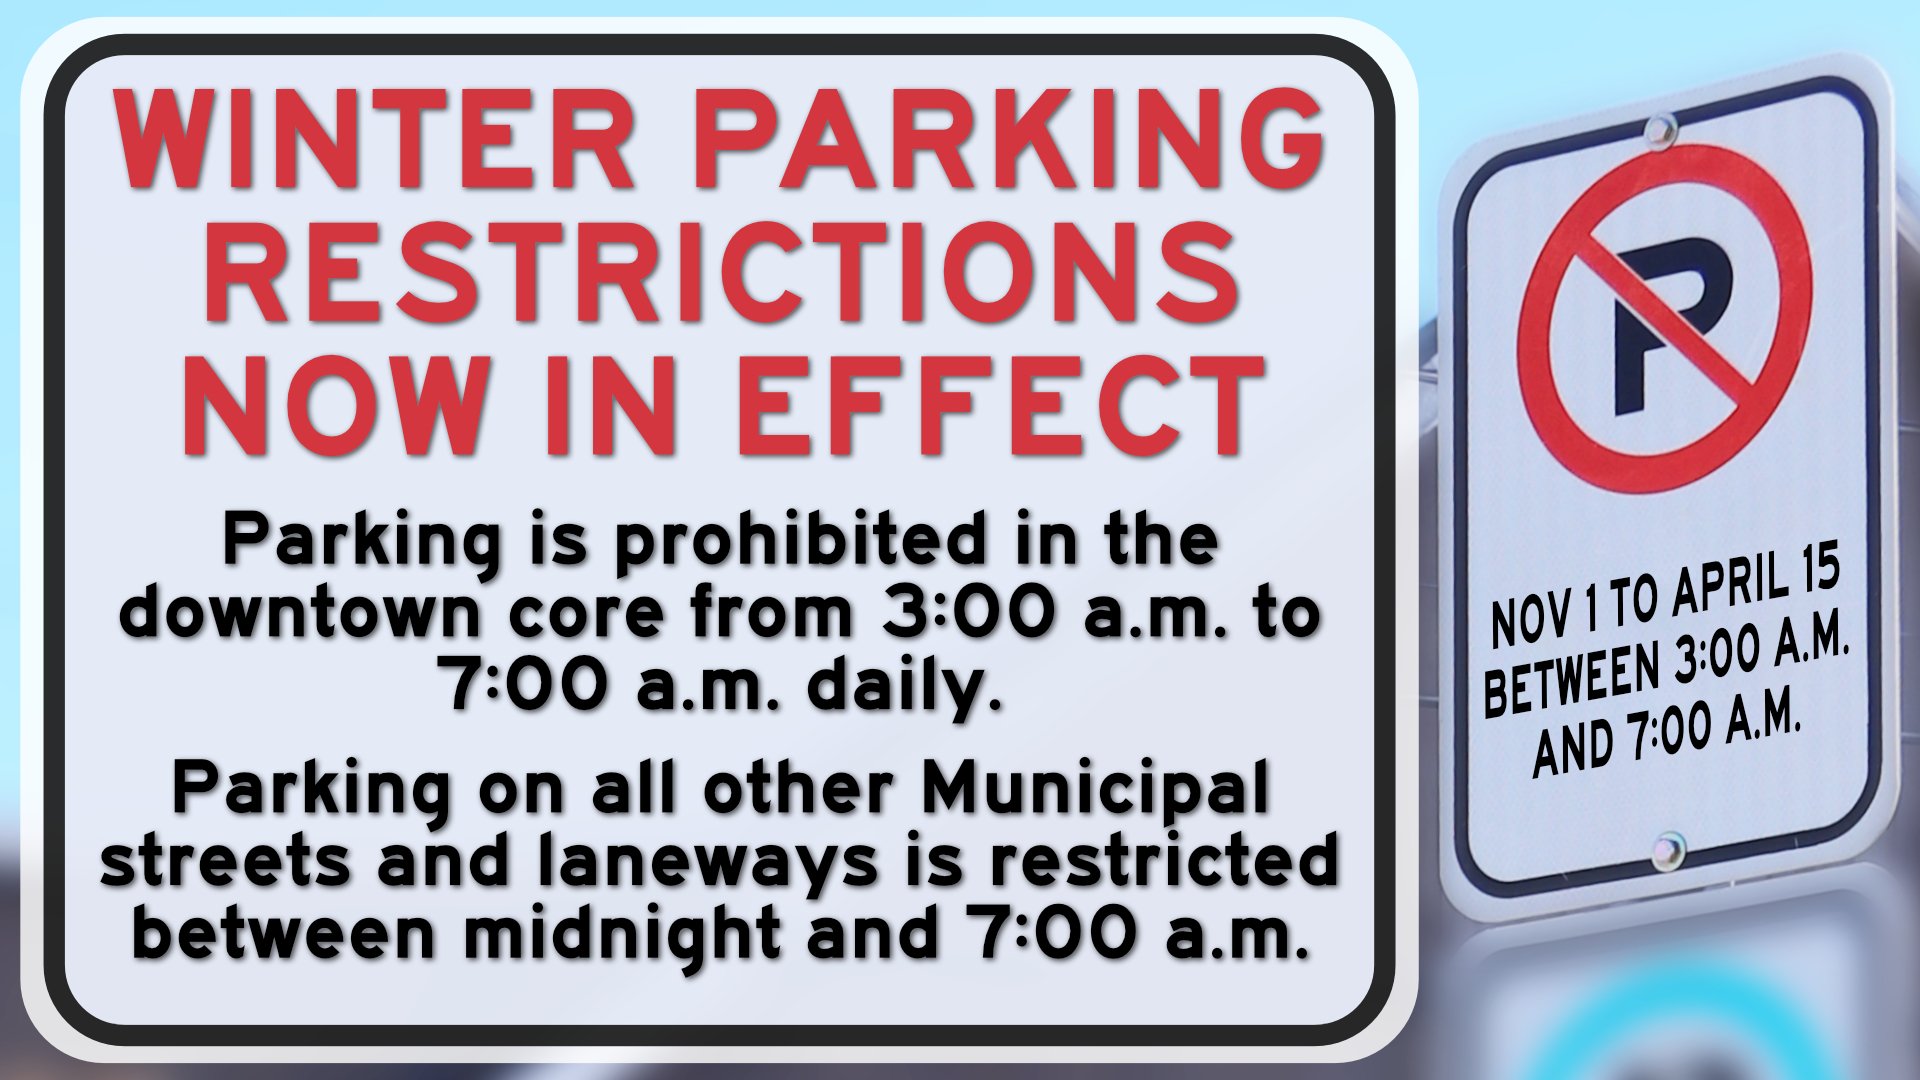 Winter Parking Restrictions in Effect